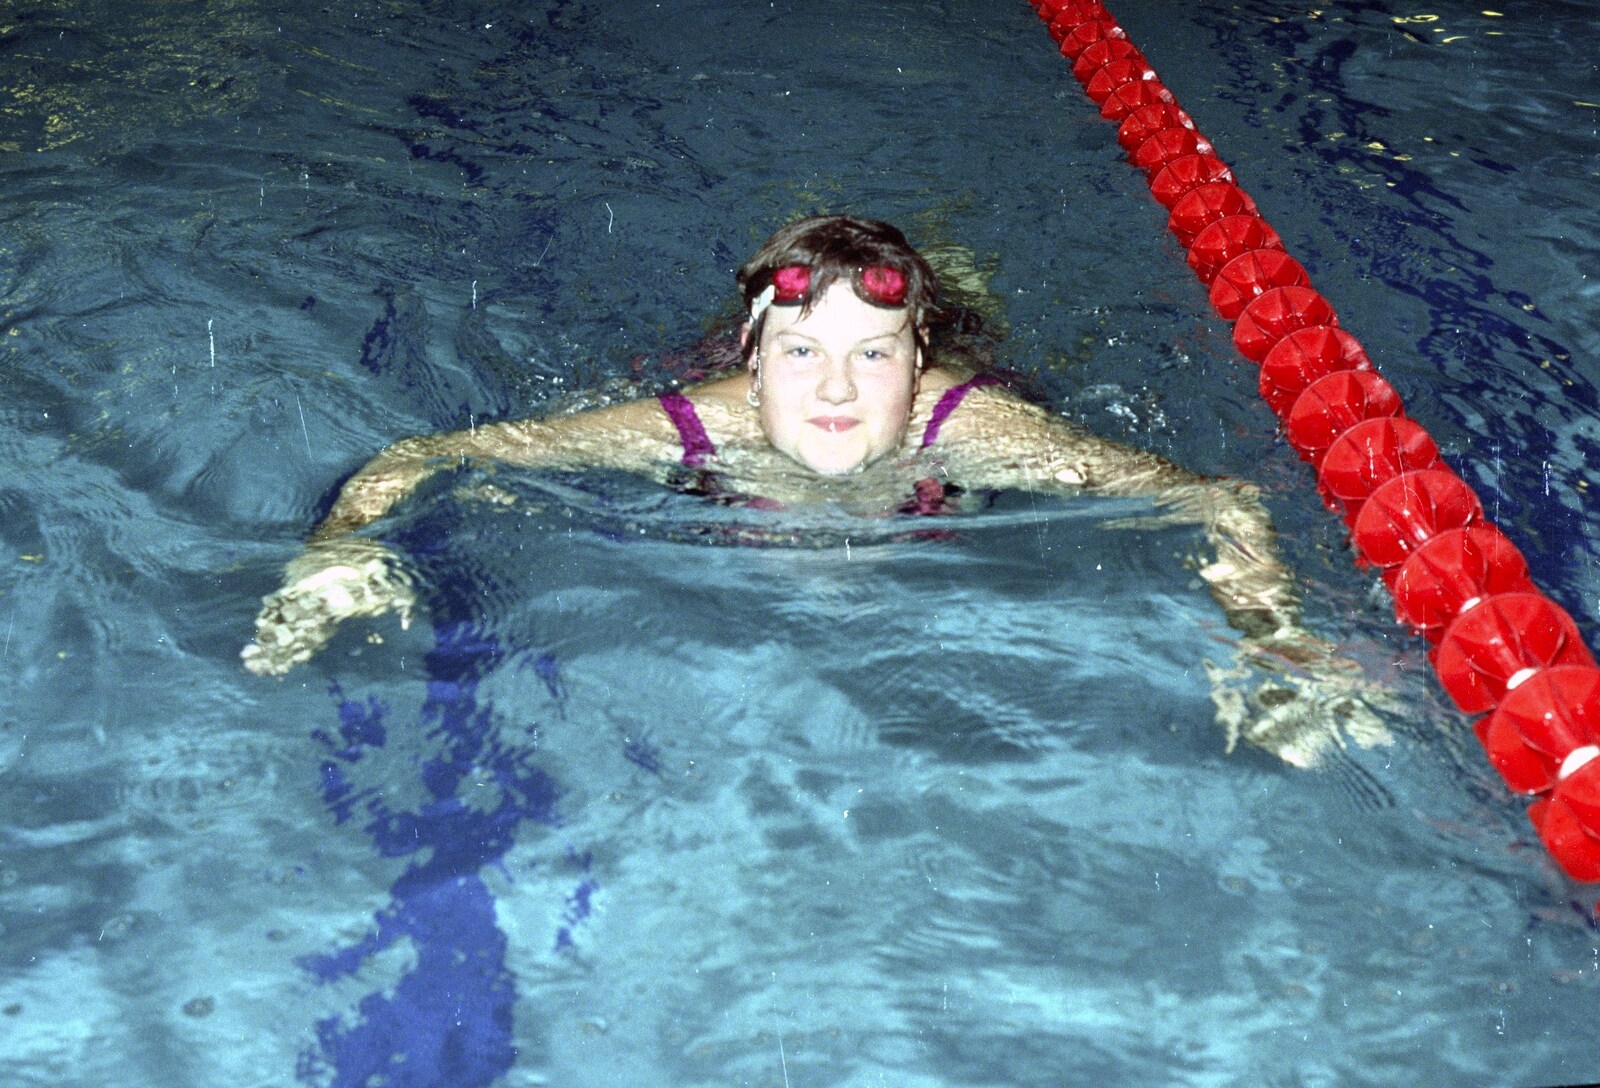 Helen from The Swan does the BHF Sponsored Swim, Diss Pool, Norfolk - 3rd October 1994